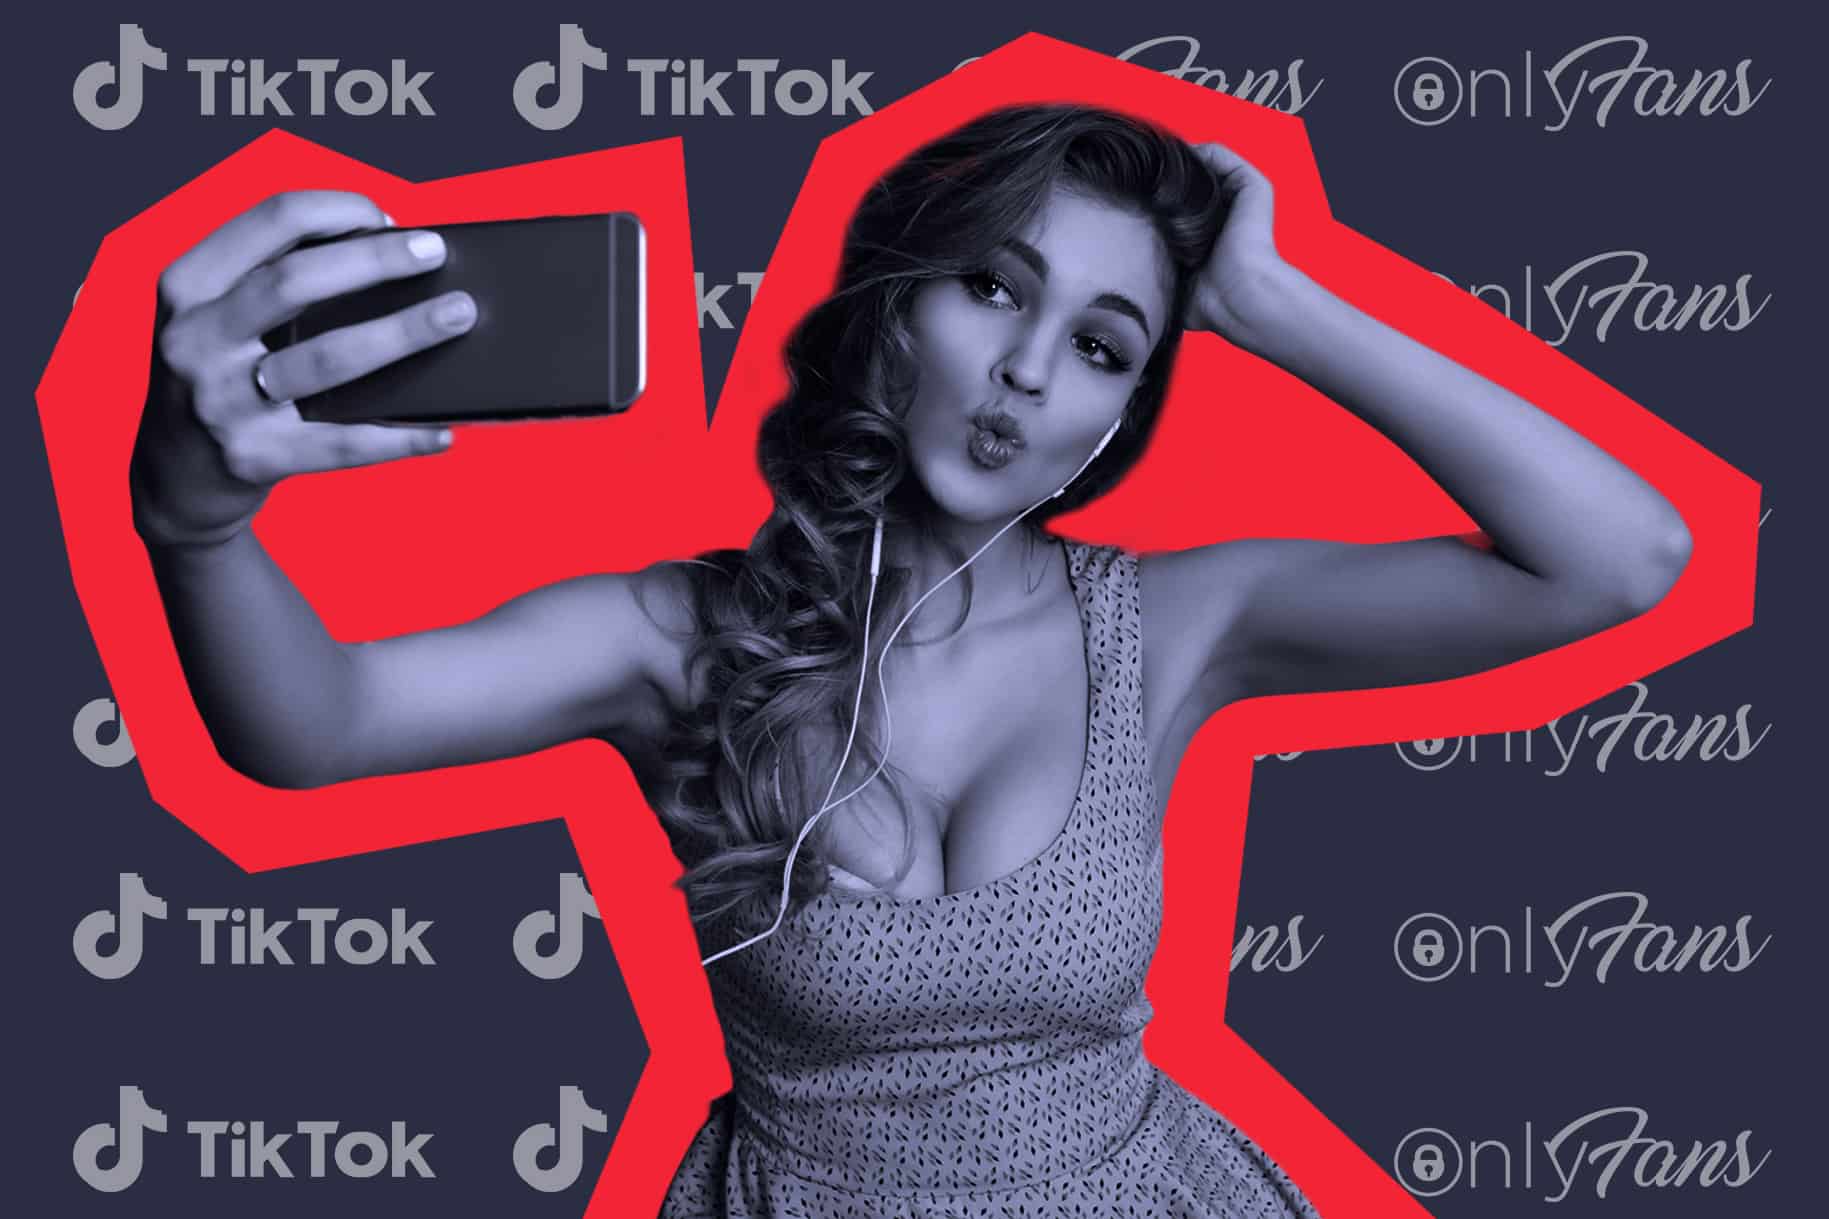 Best tiktokers with only fans